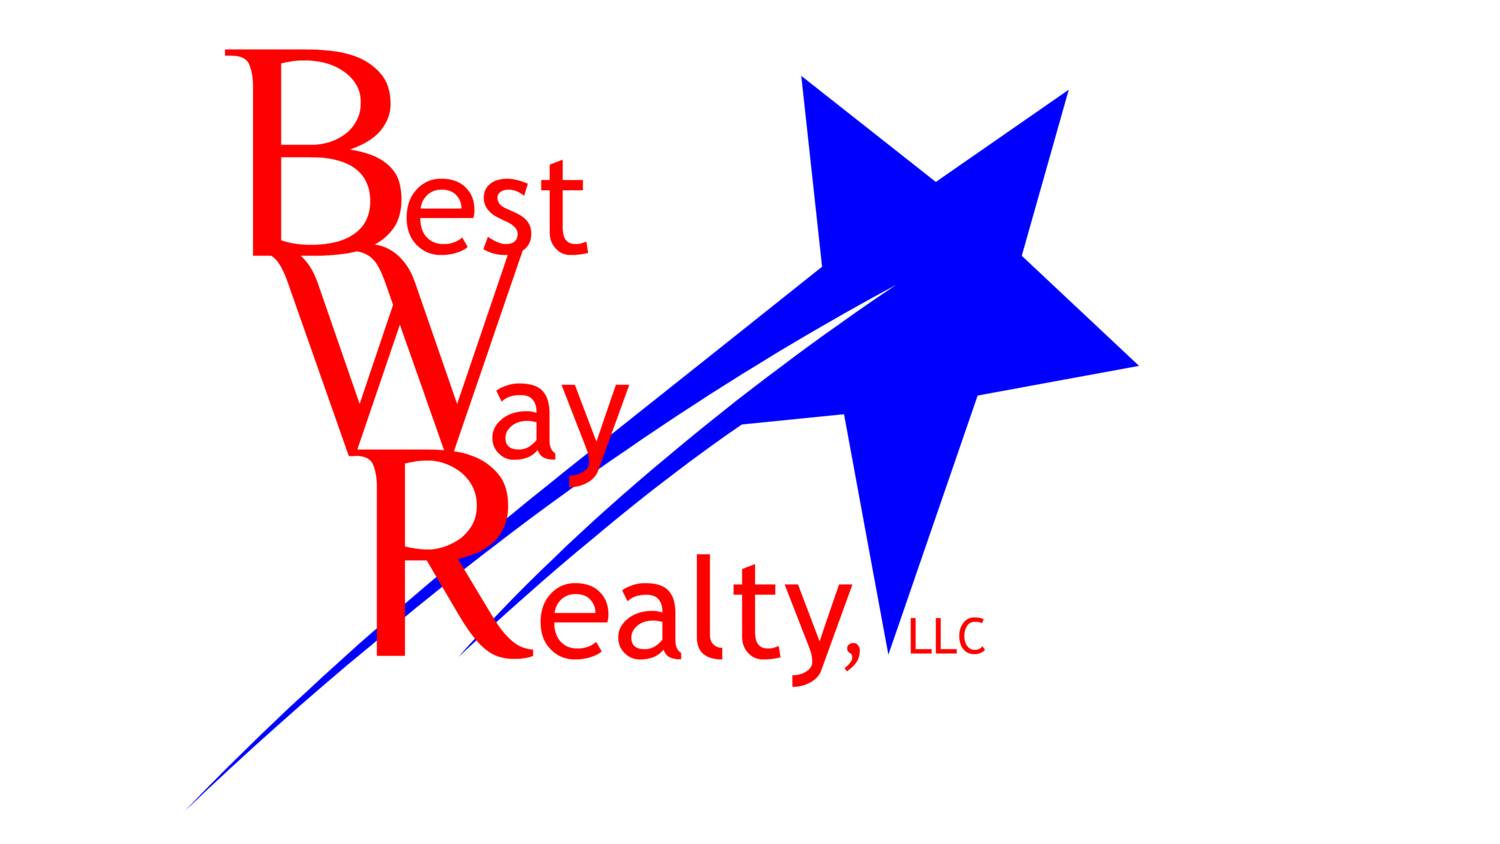 Peterson Best Way Realty